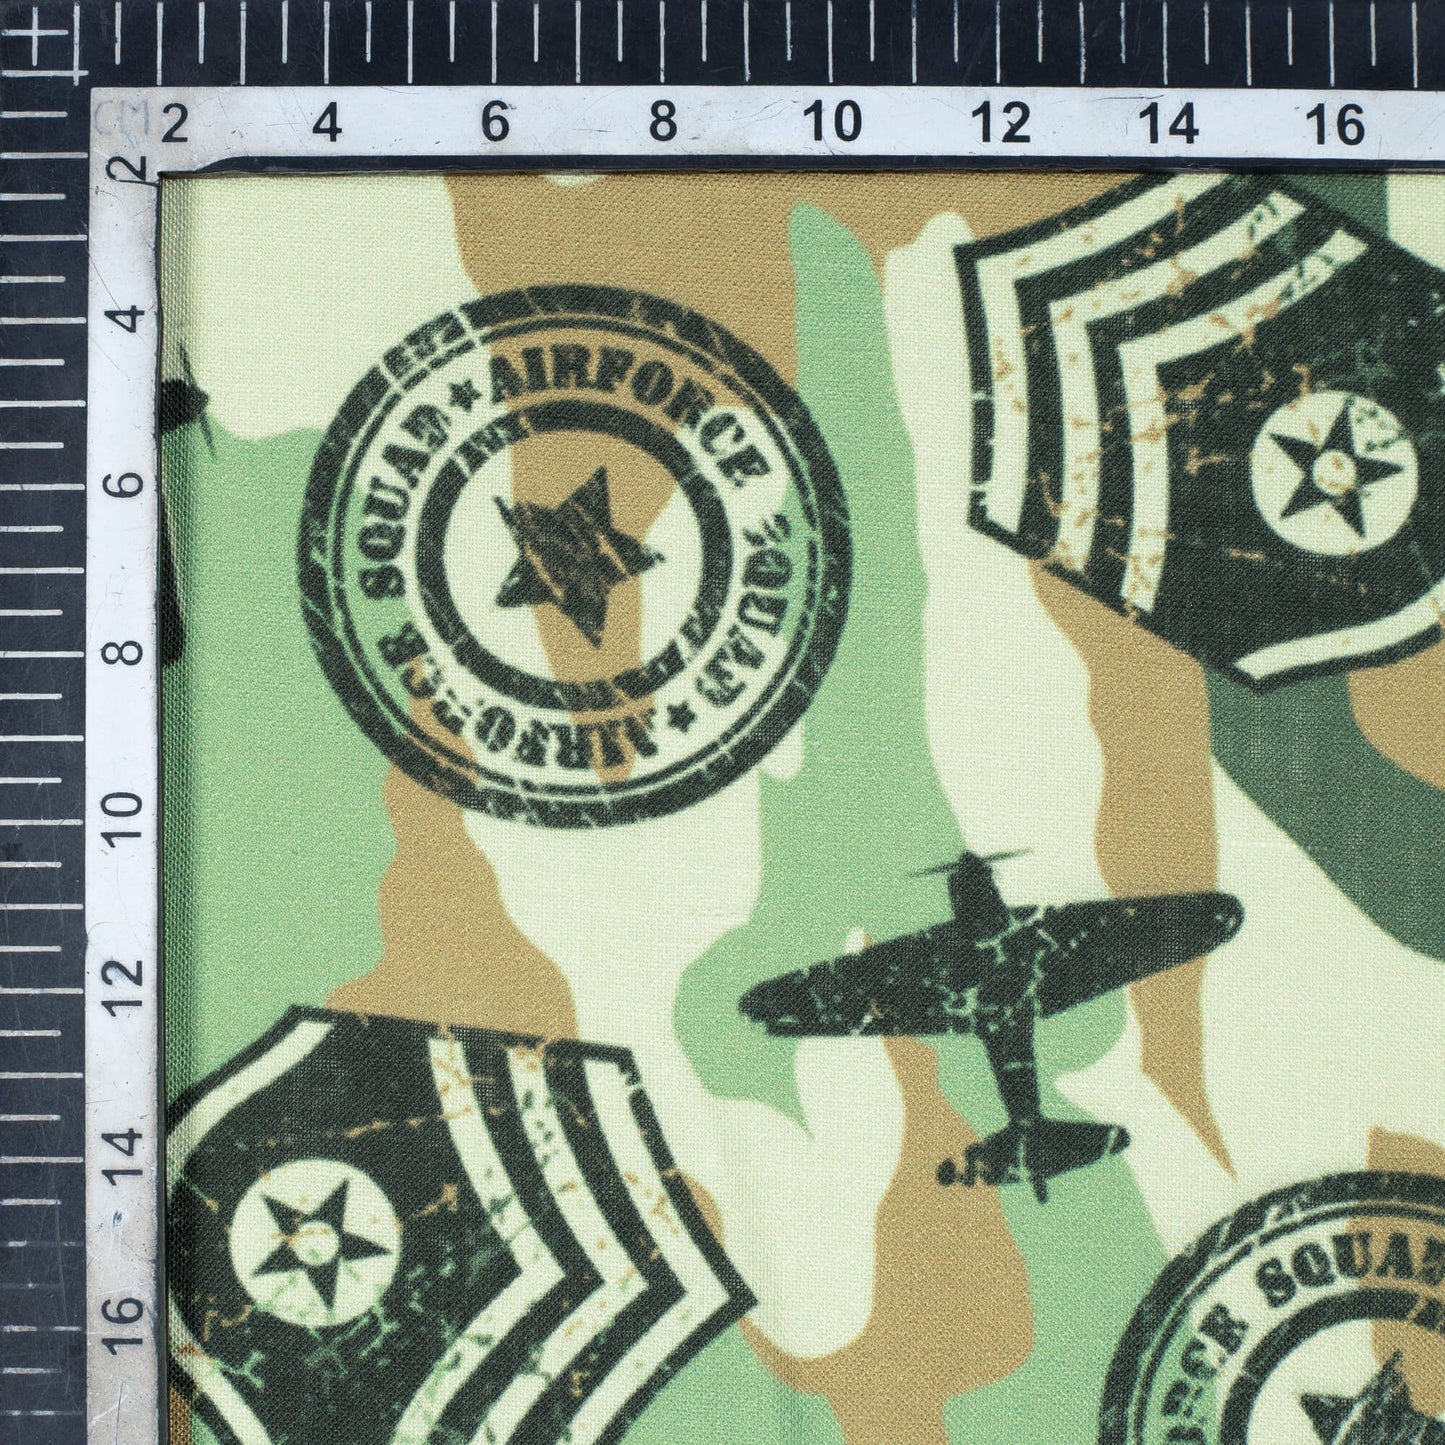 Army Green And Black Camouflage Digital Print Linen Textured Fabric (Width 56 Inches) - Fabcurate